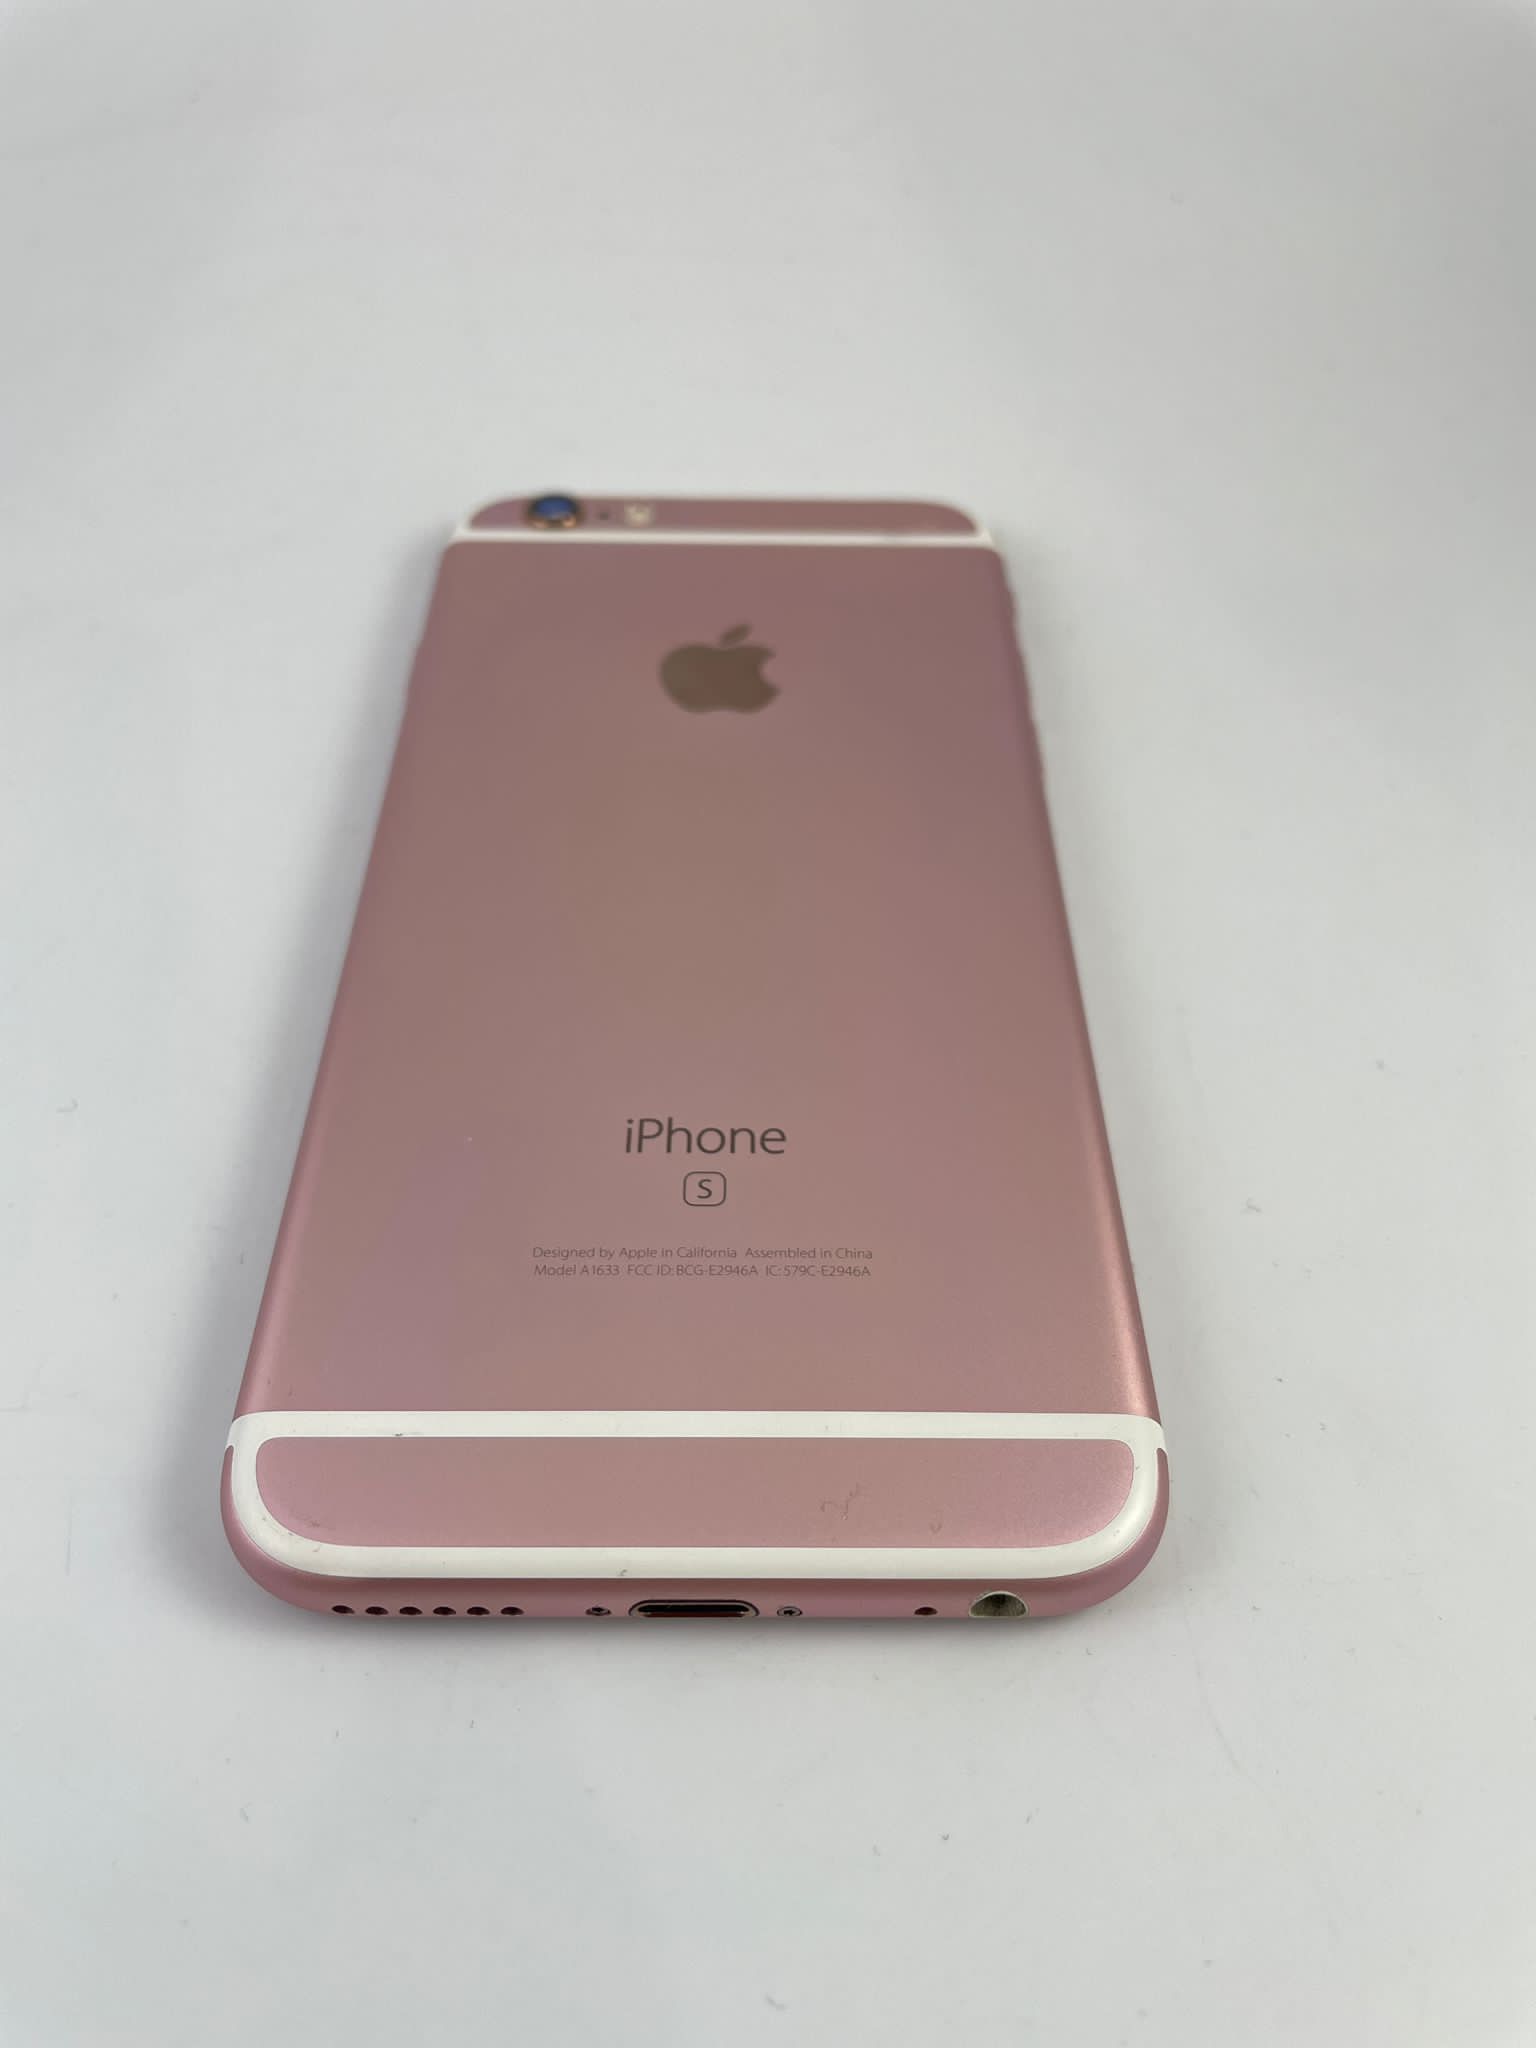 APPLE IPHONE 6S 16GB ROSE GOLD FULLY FUNCTIONAL!!!!